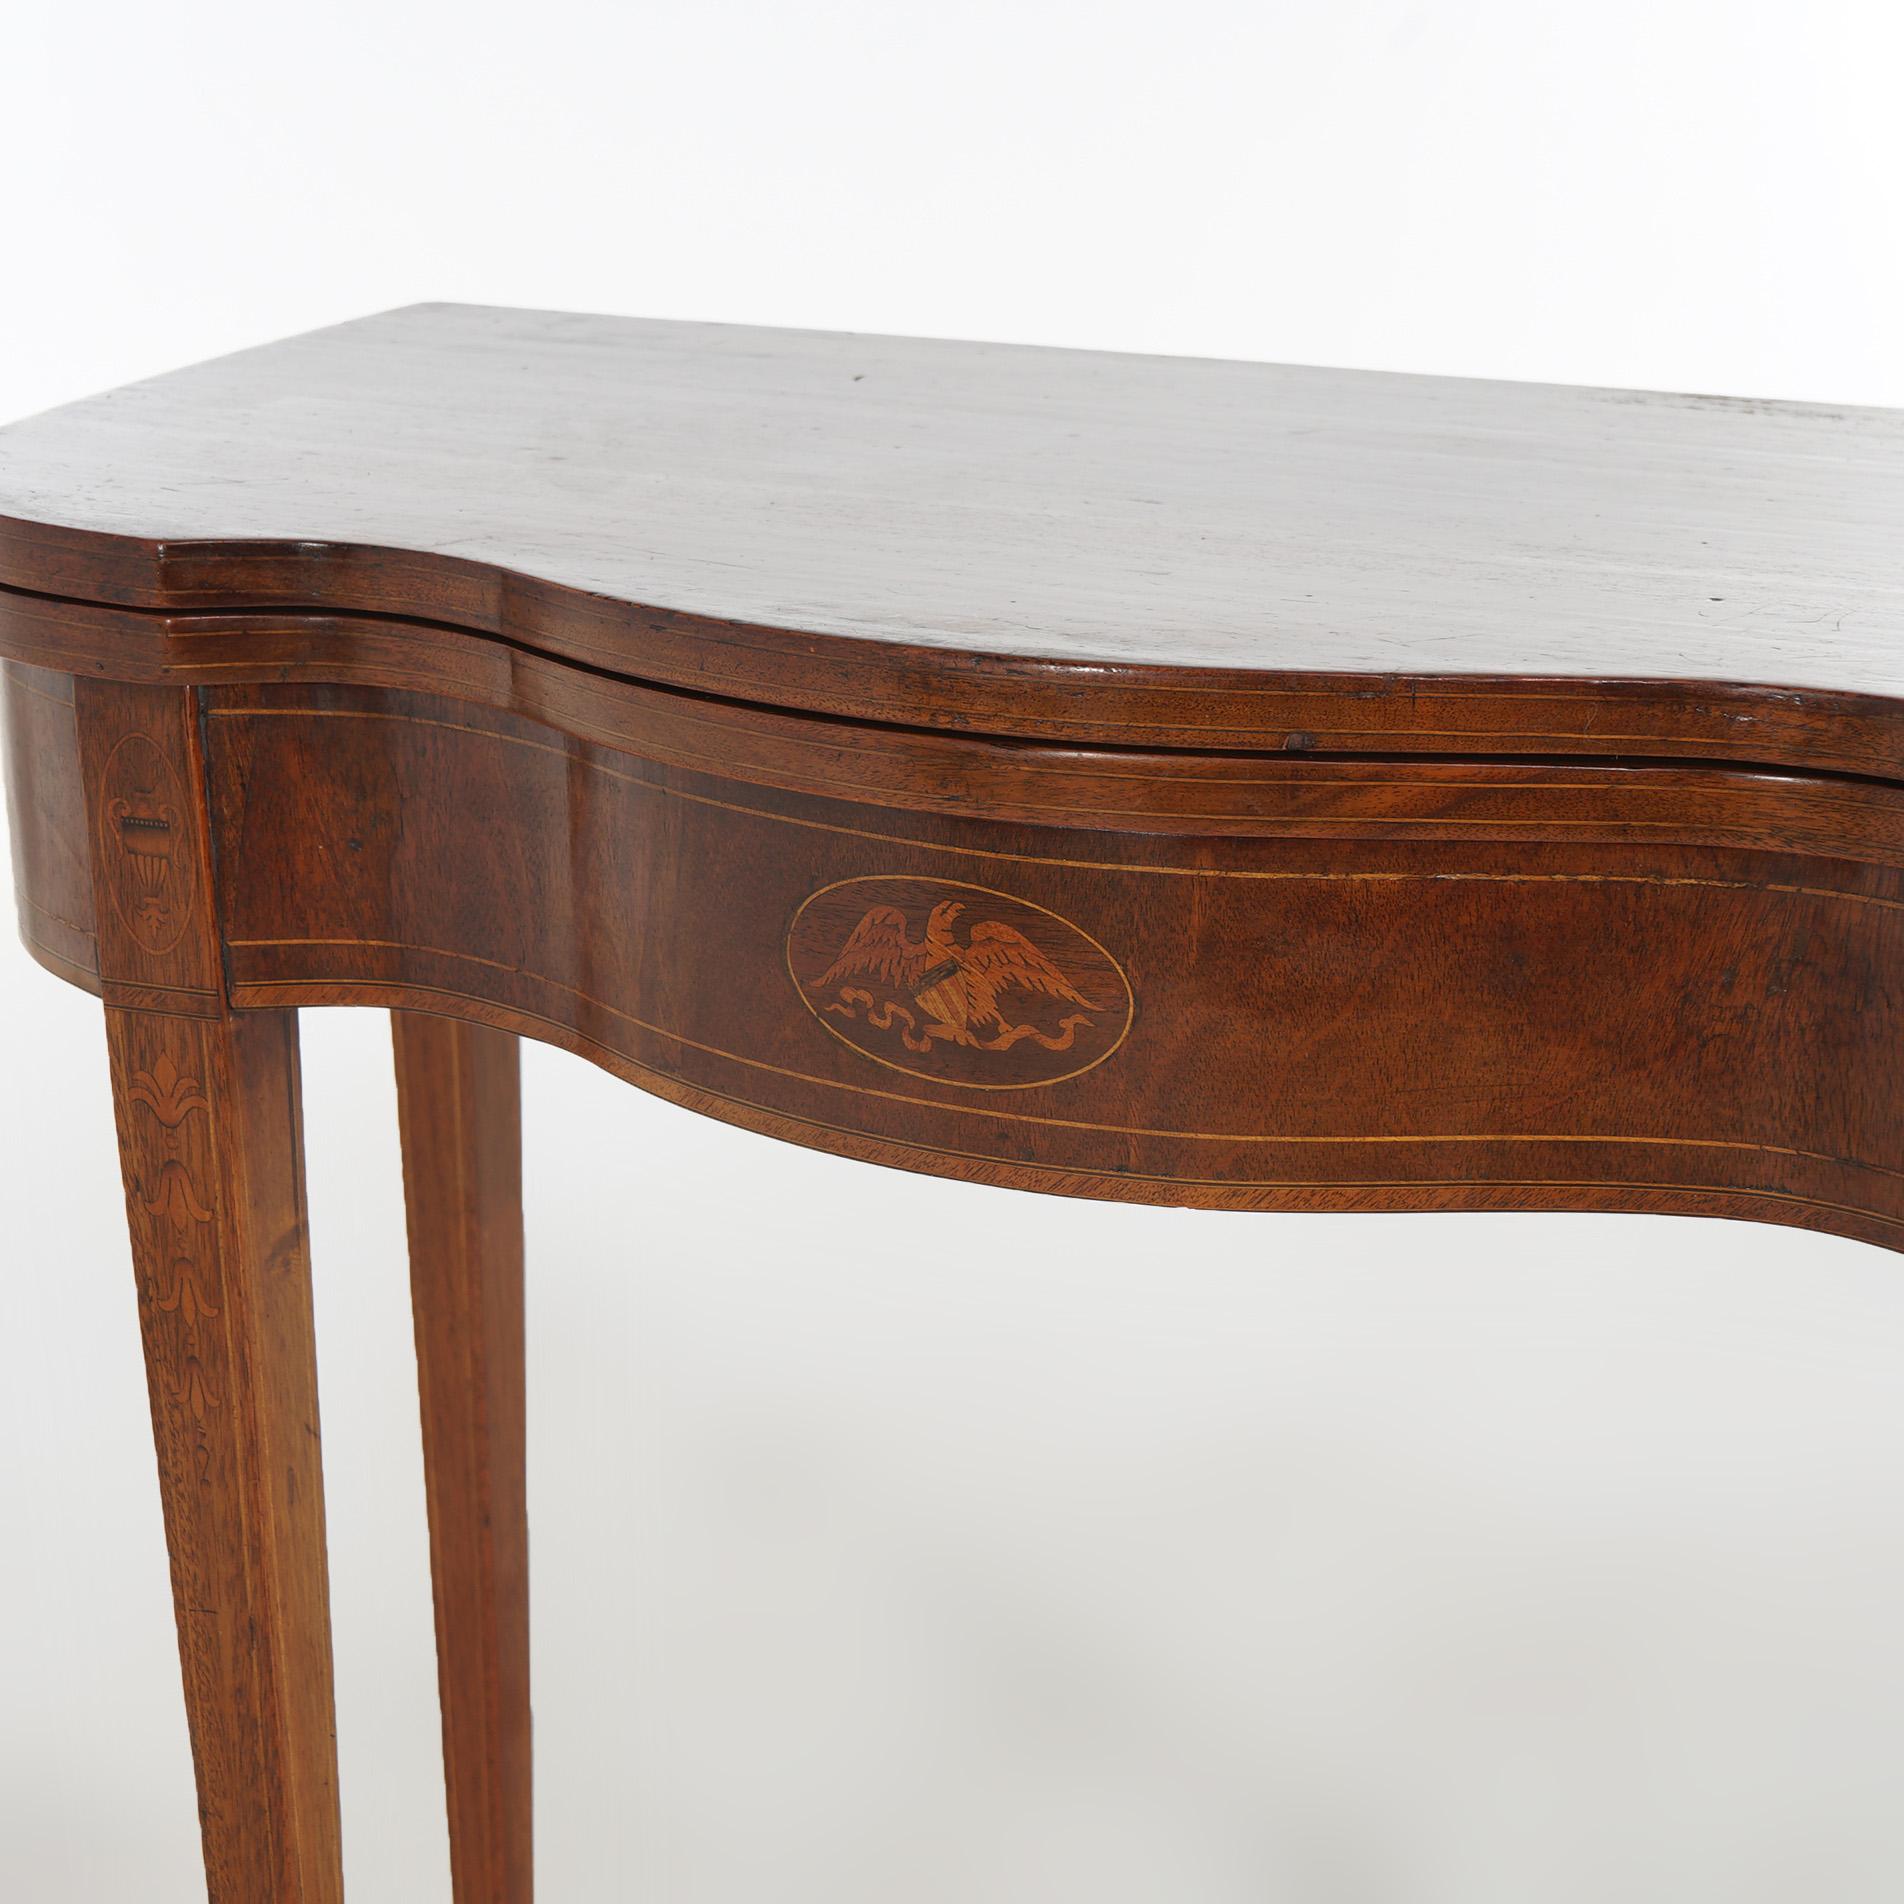 19th Century Federal Mahogany Swell Front Card Table, Bell Flower & Eagle Inlay, C1830 For Sale